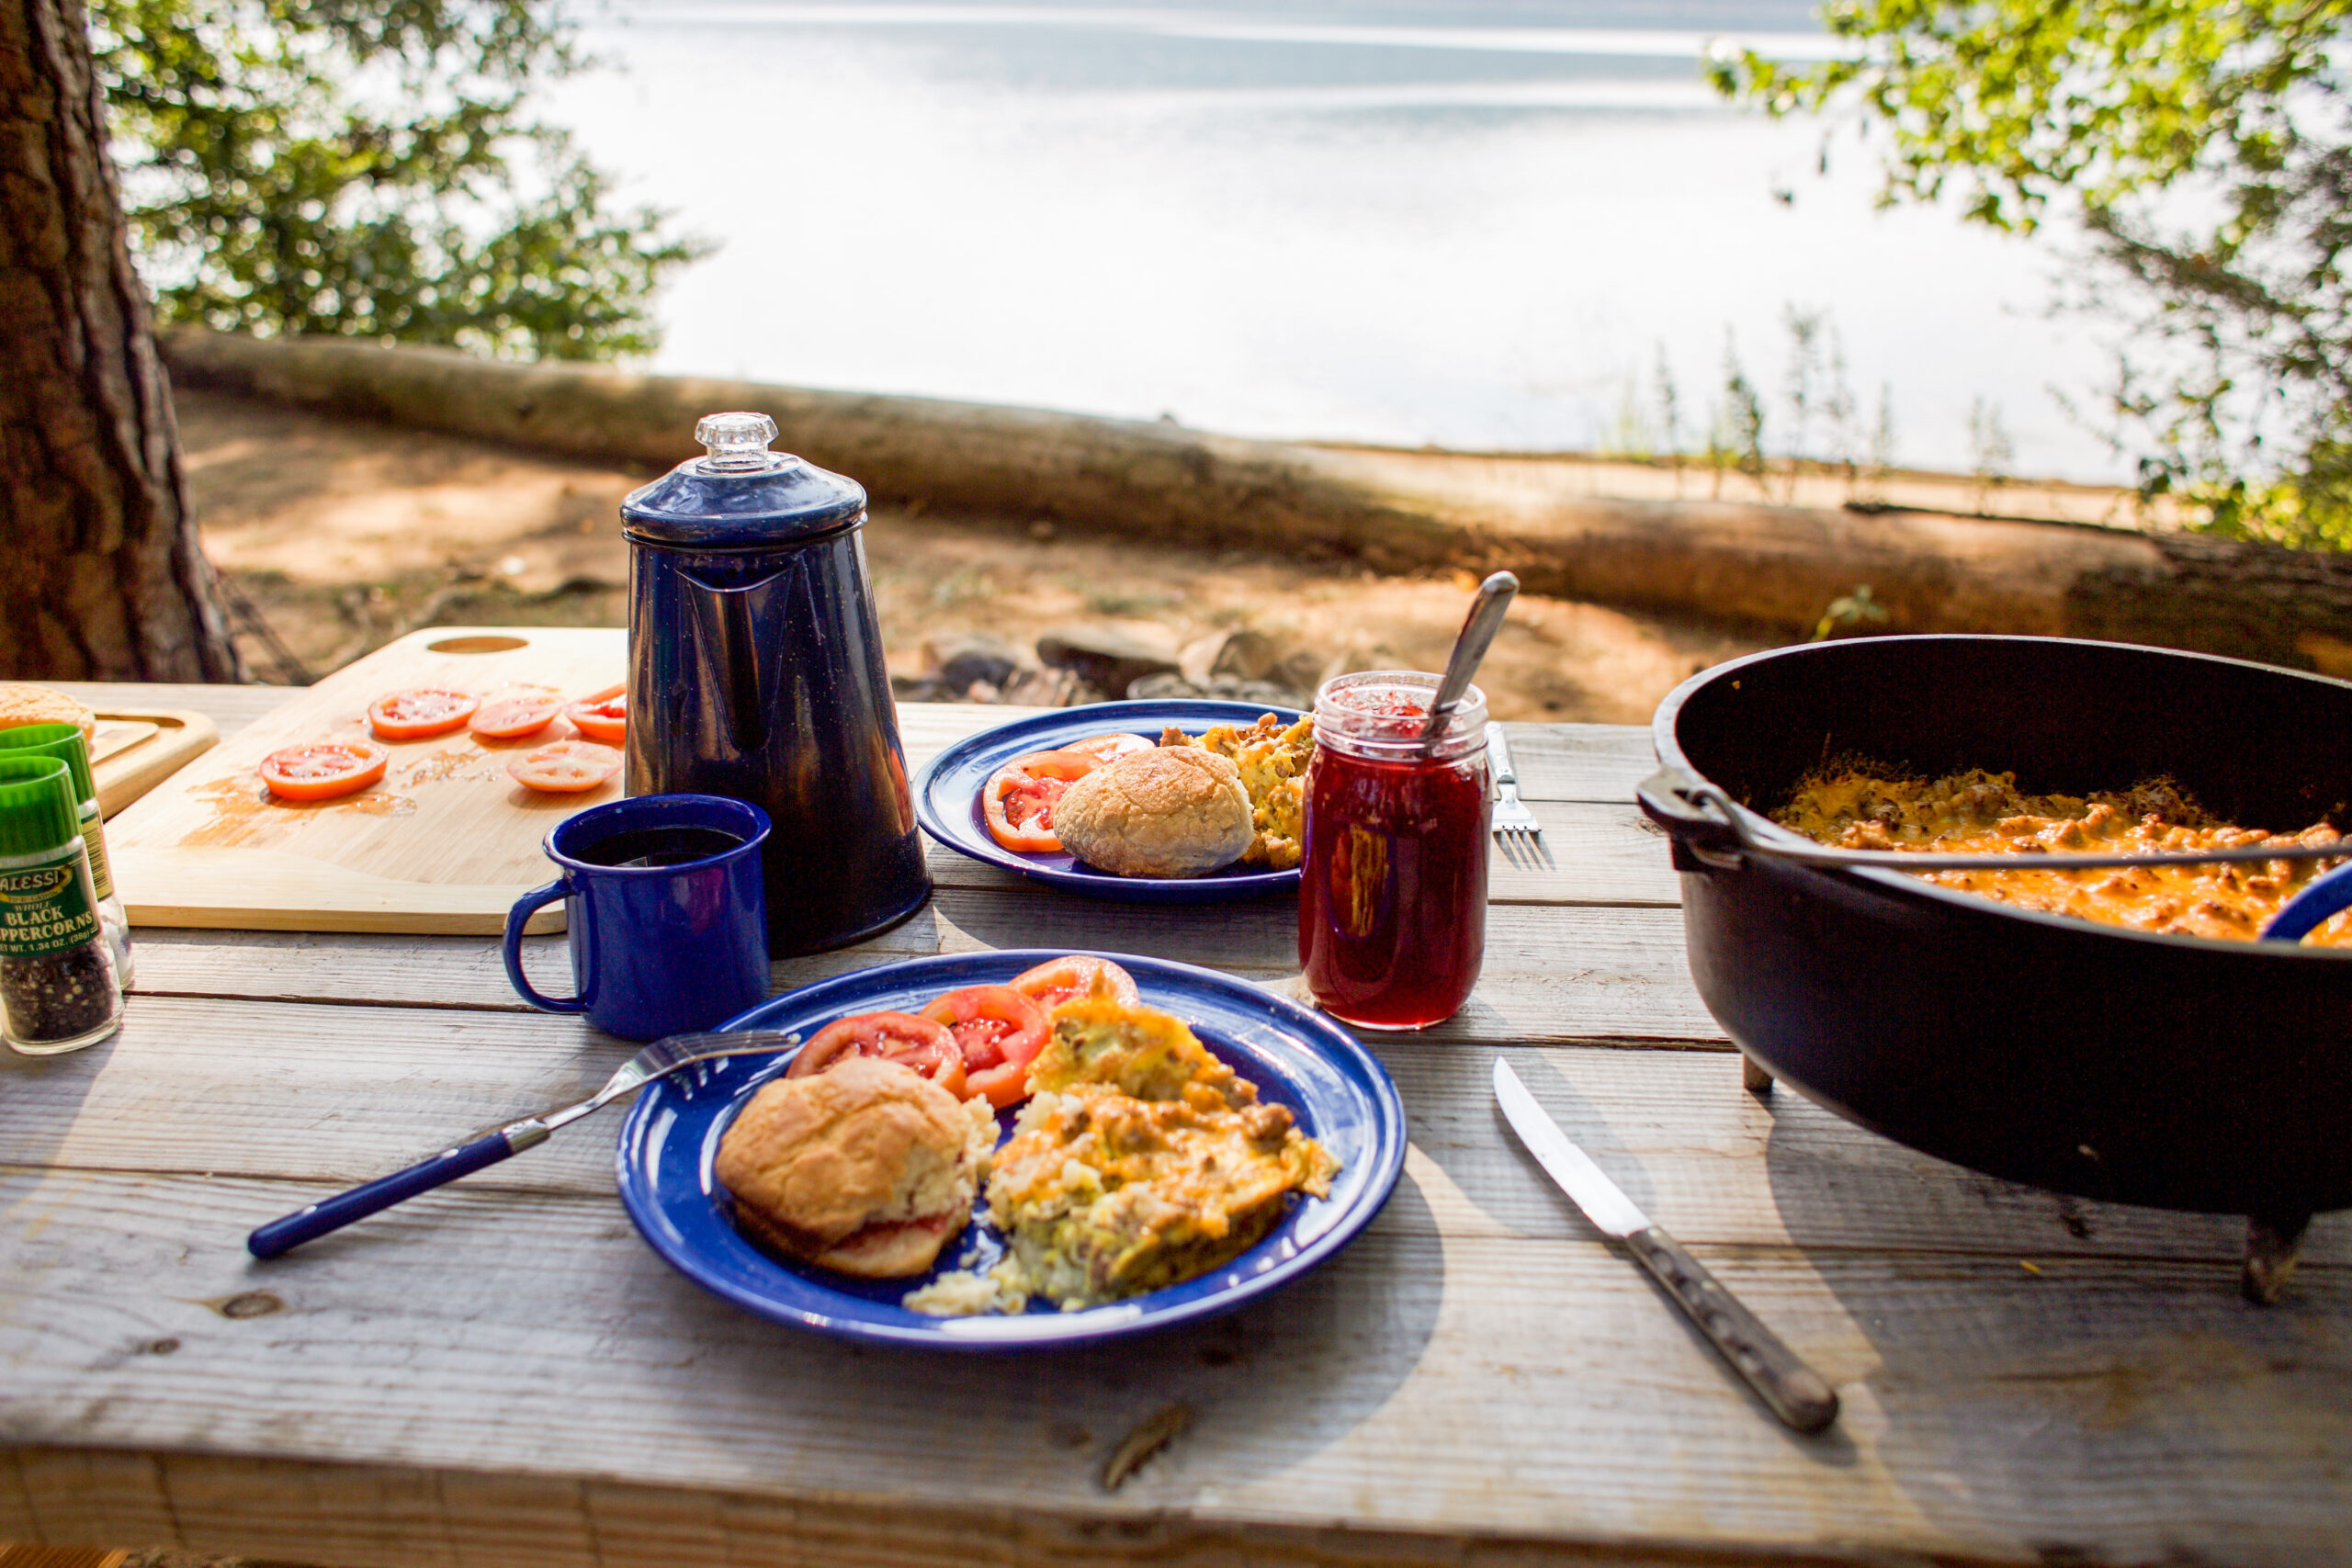 Lodge Cast Iron: Great Camping Gear and Best Fall Recipes - The RV Atlas